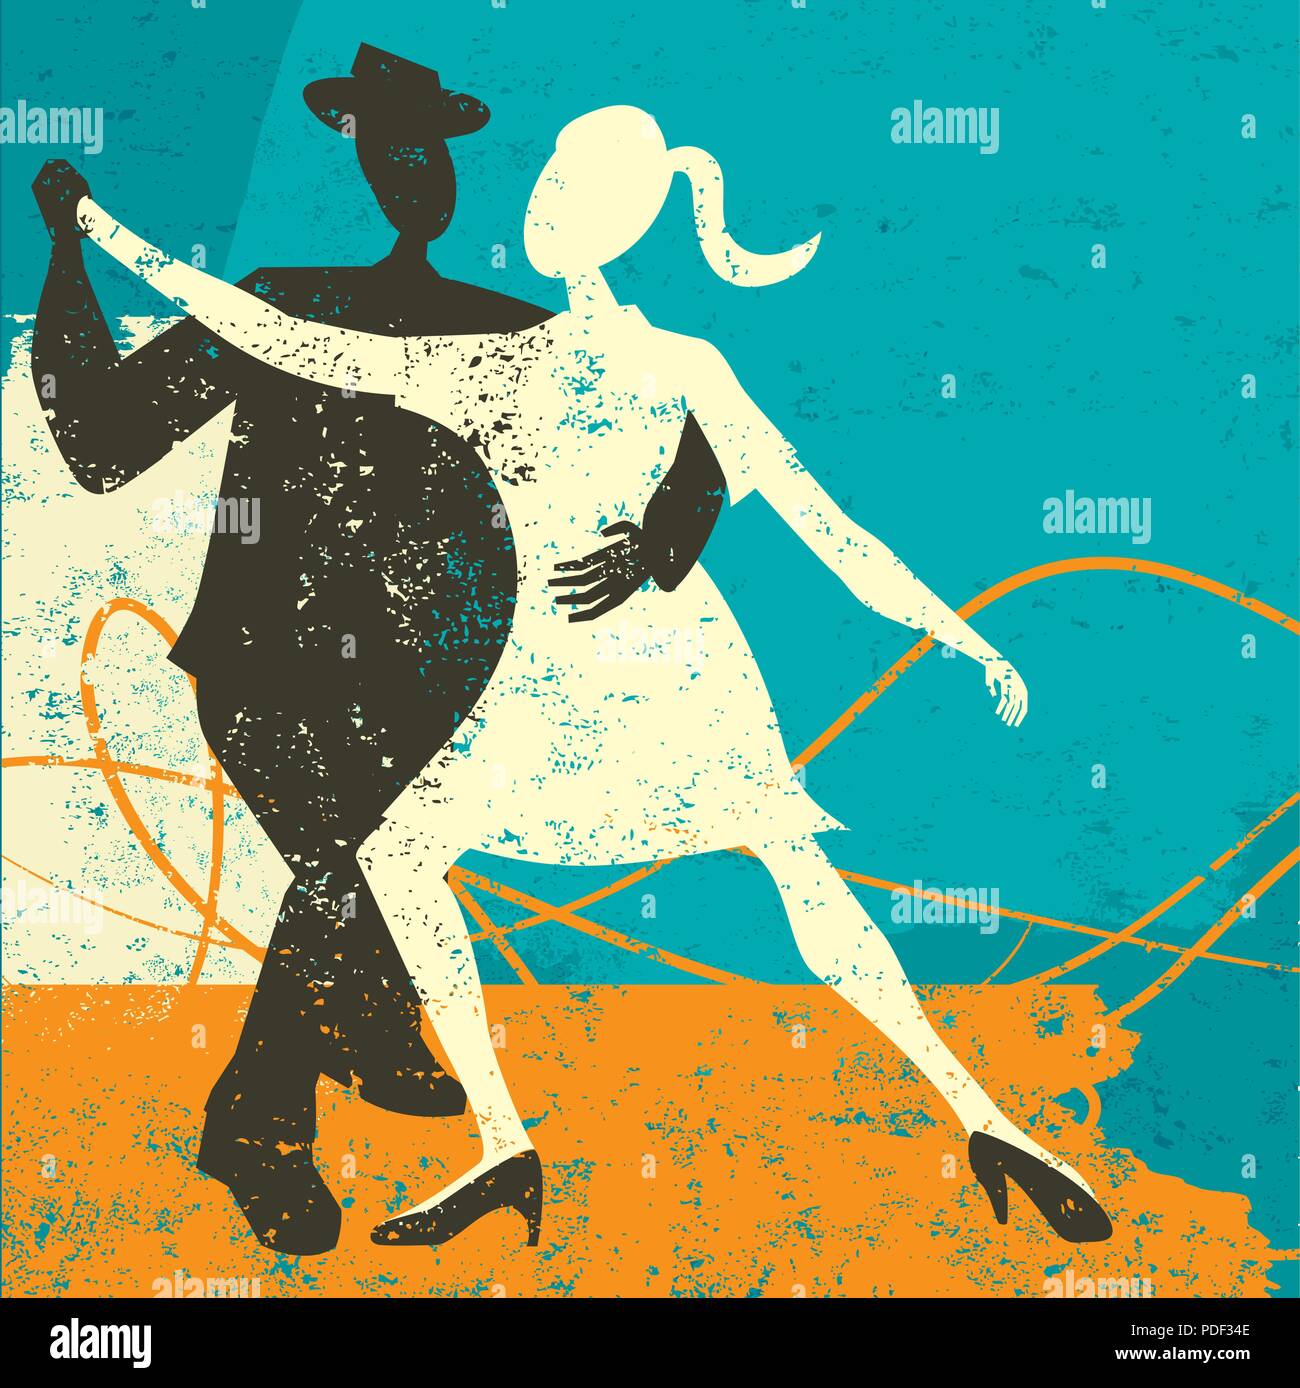 Two Tango Dancers. Two people in silhouette dancing the tango over an abstract background. Stock Vector